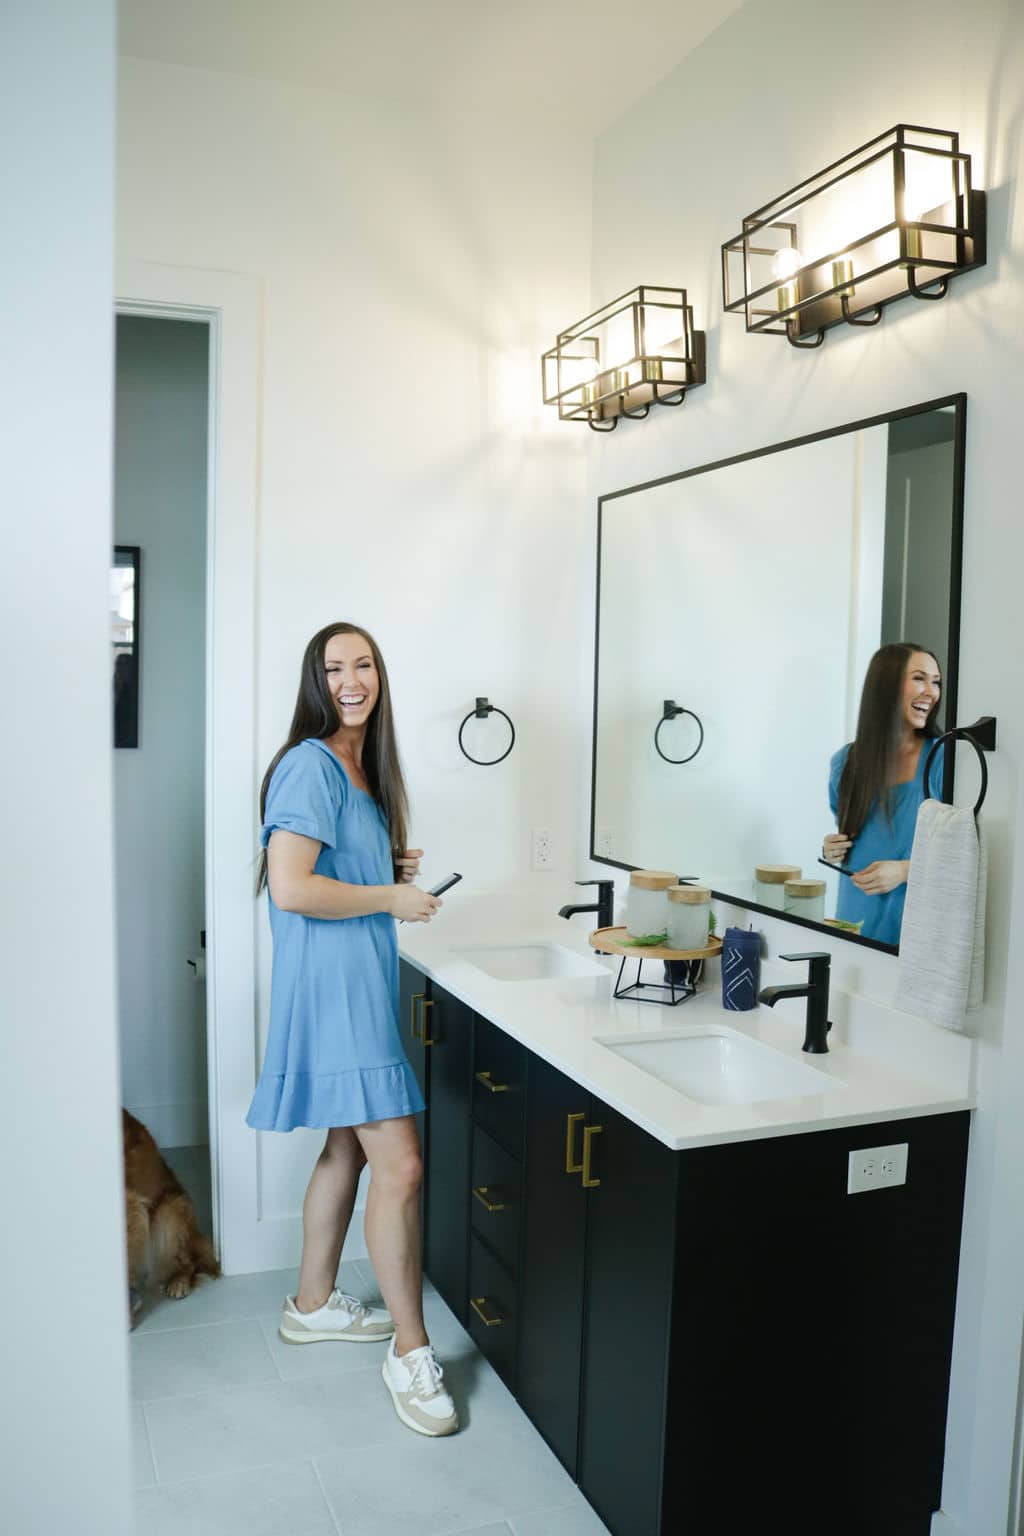 Woman laughing in front of the bathroom sink, looking at the camera